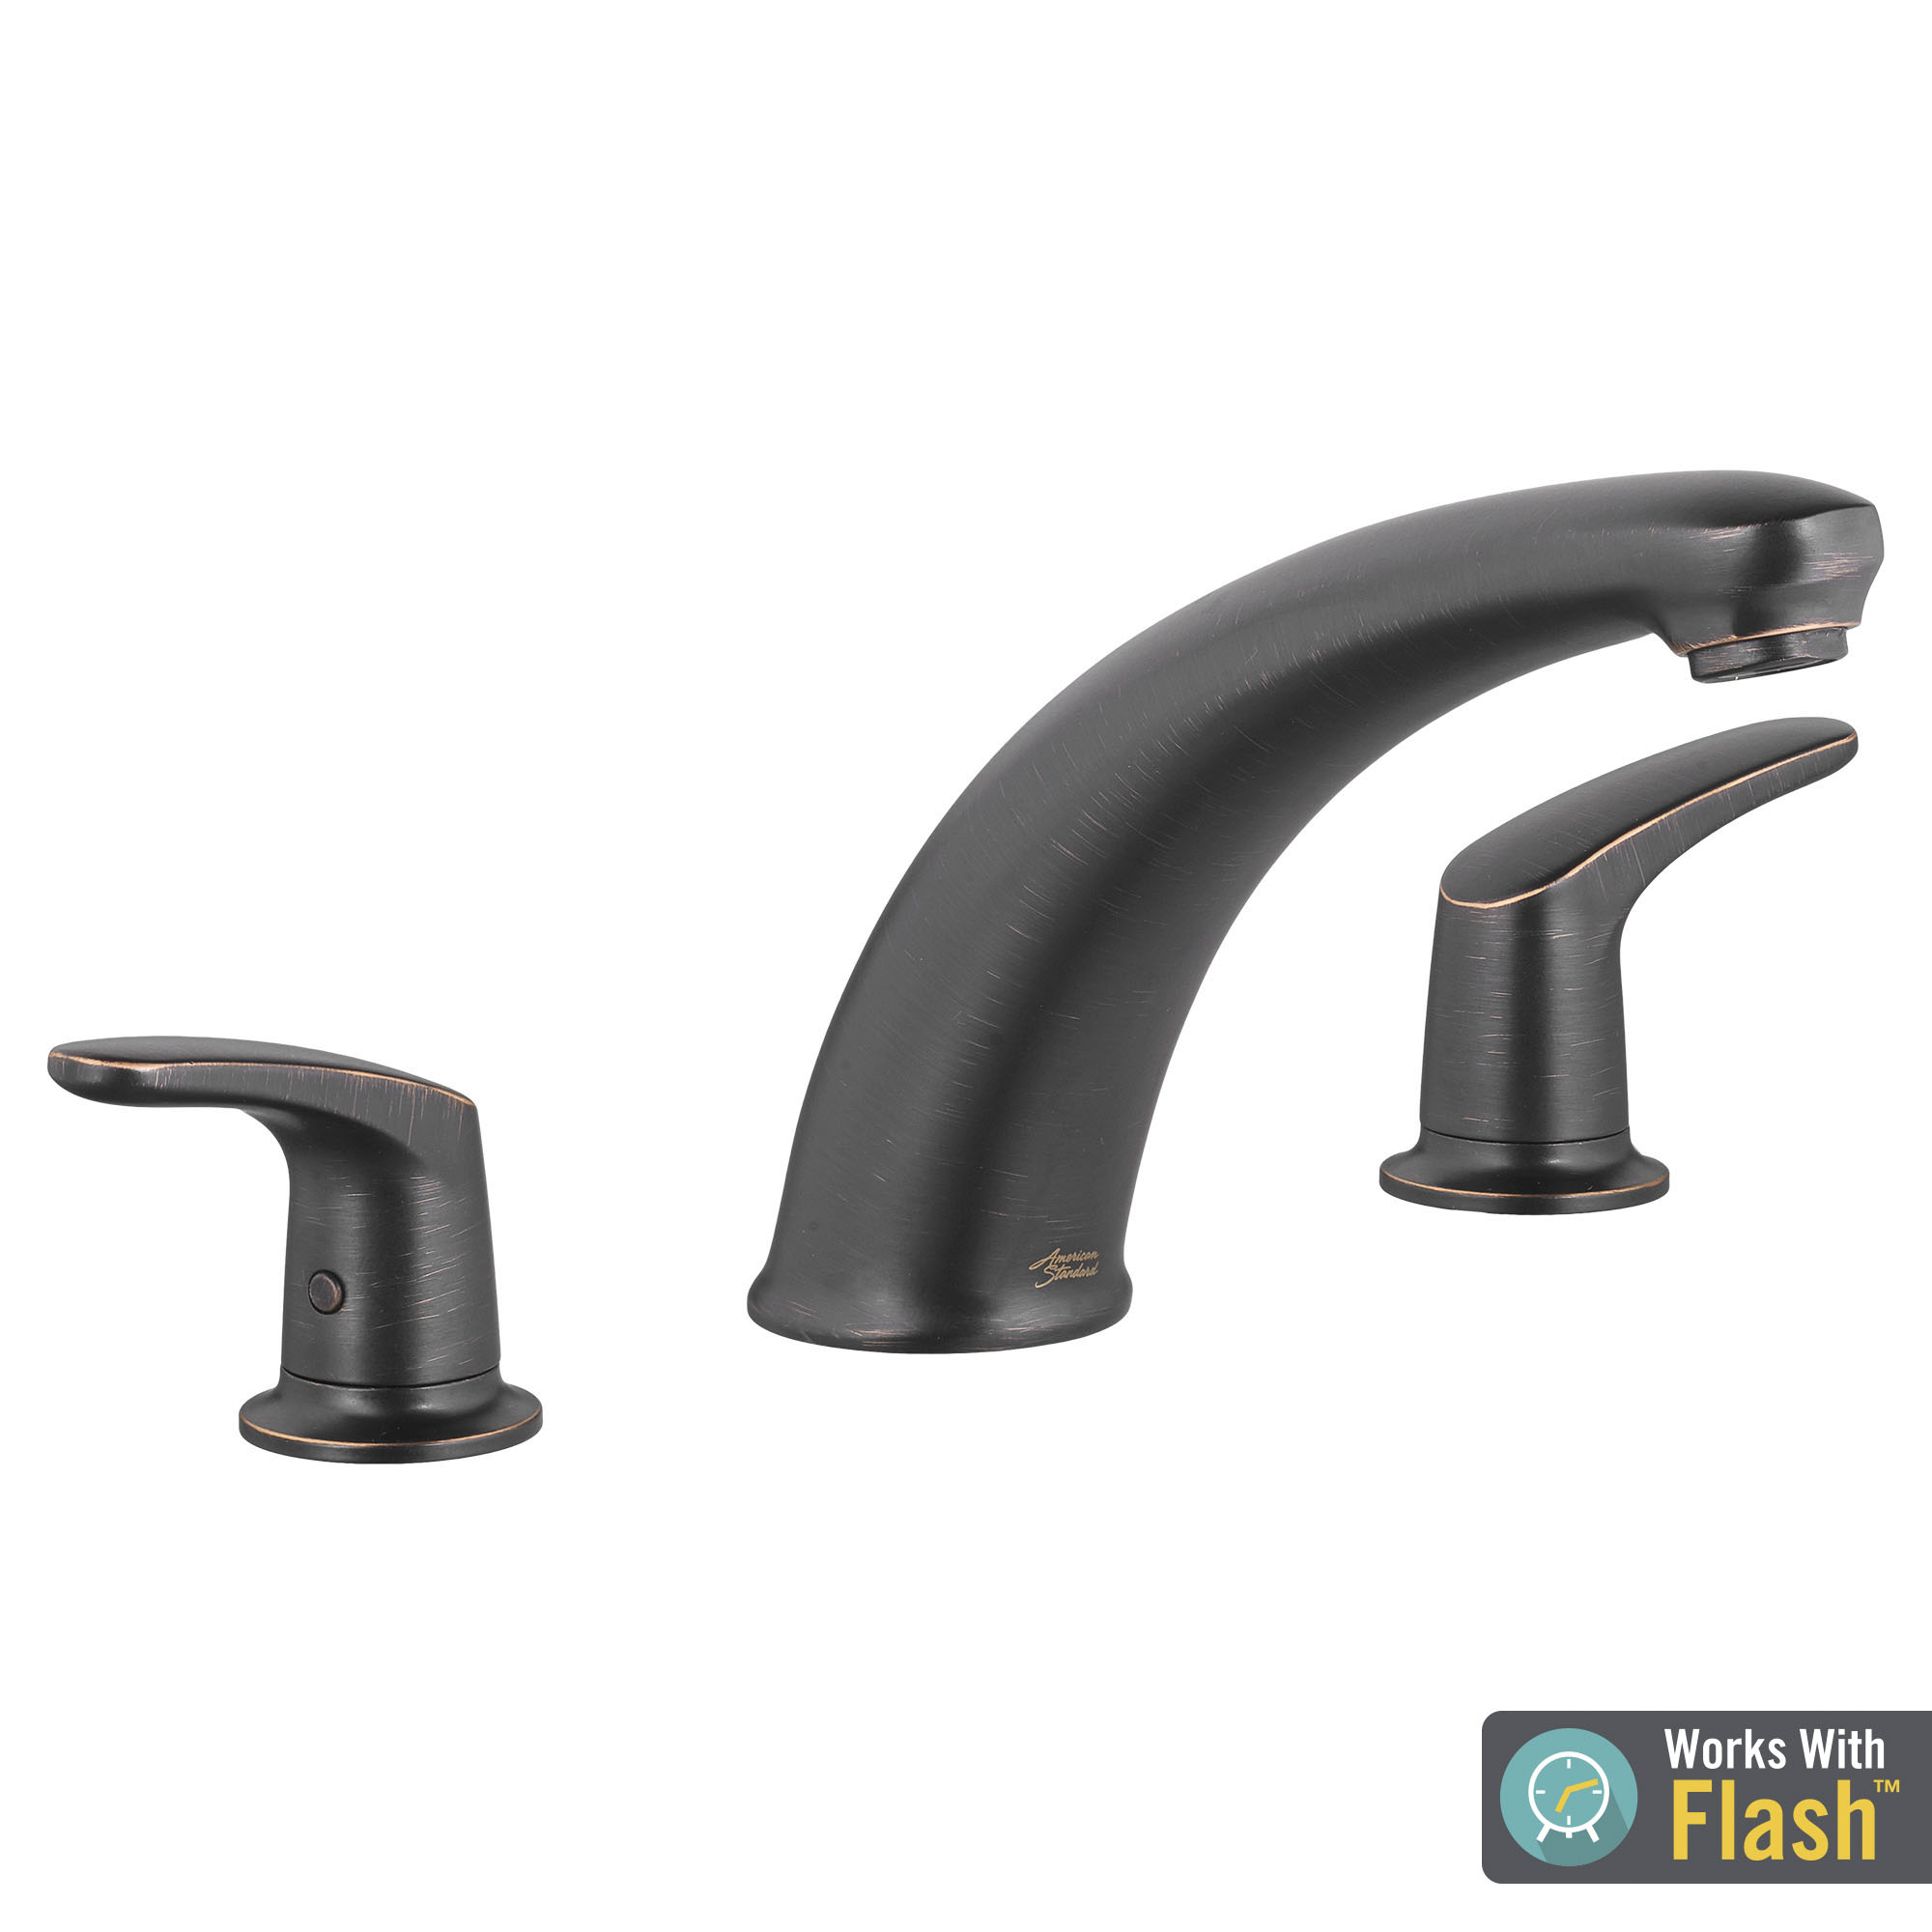 T075.920.278 COLONY PRO TUB
FILLER LEGACY BRONZE A/S FLASH